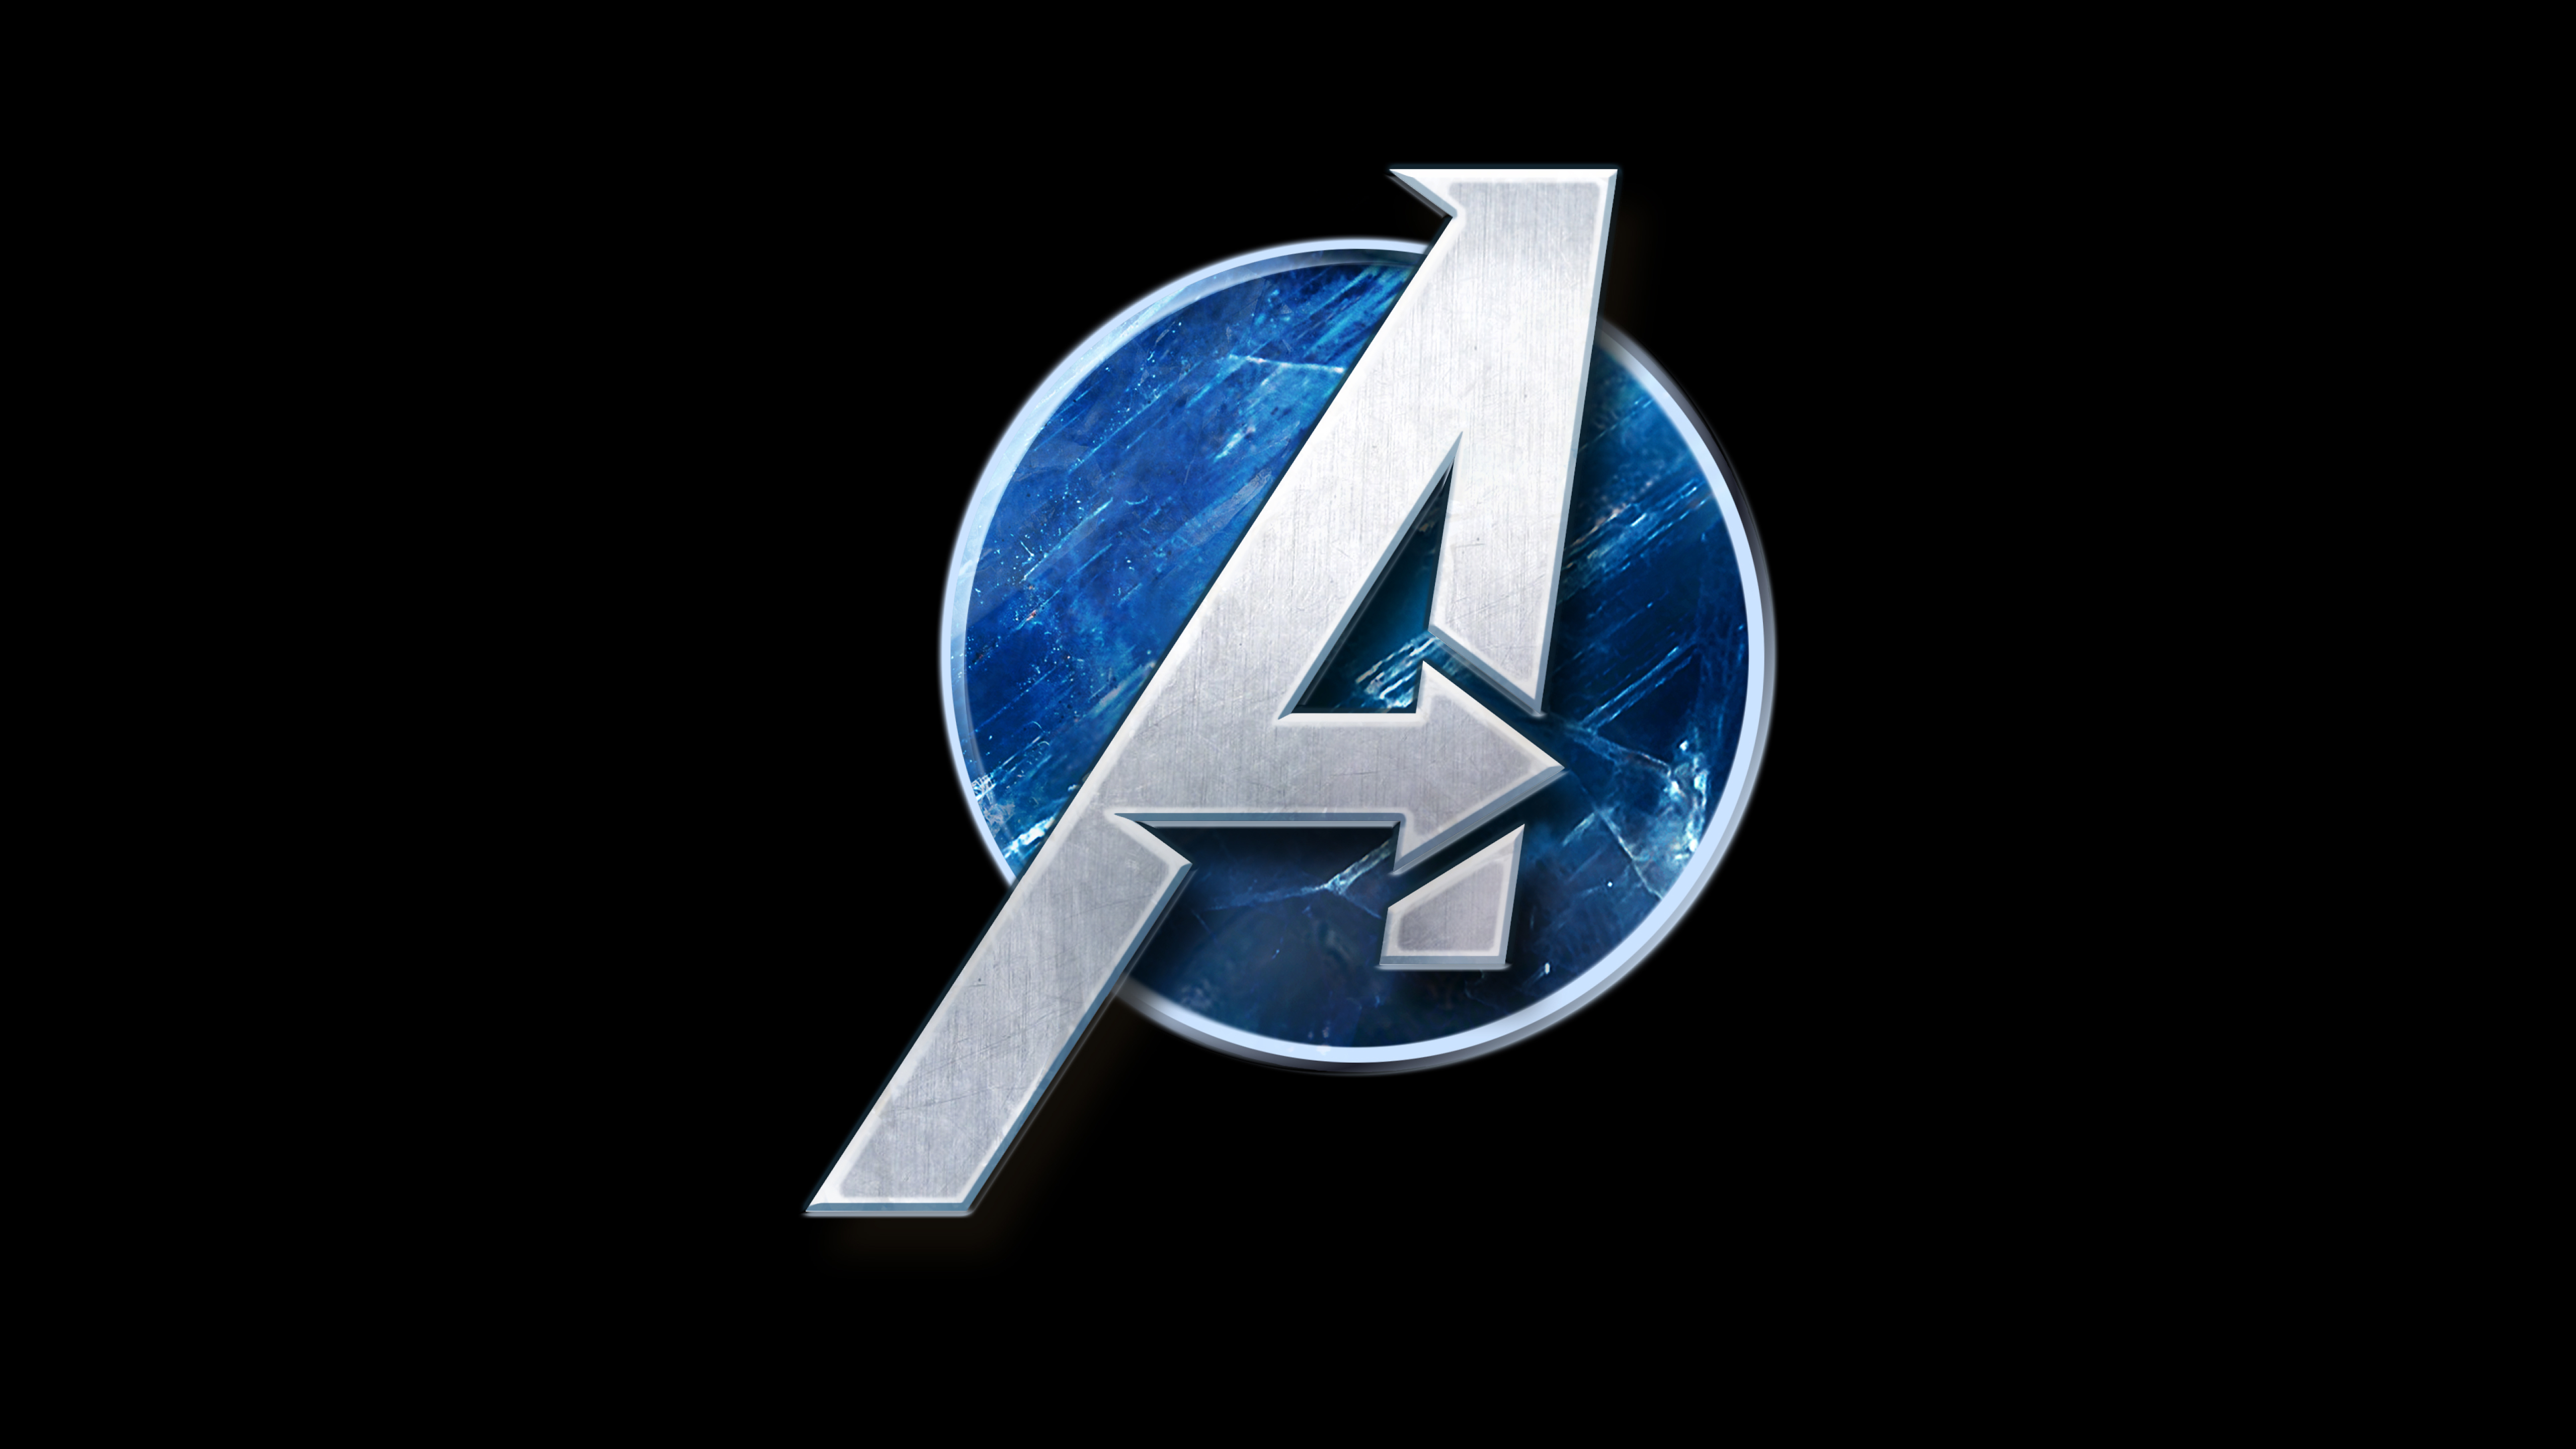 avengers game download